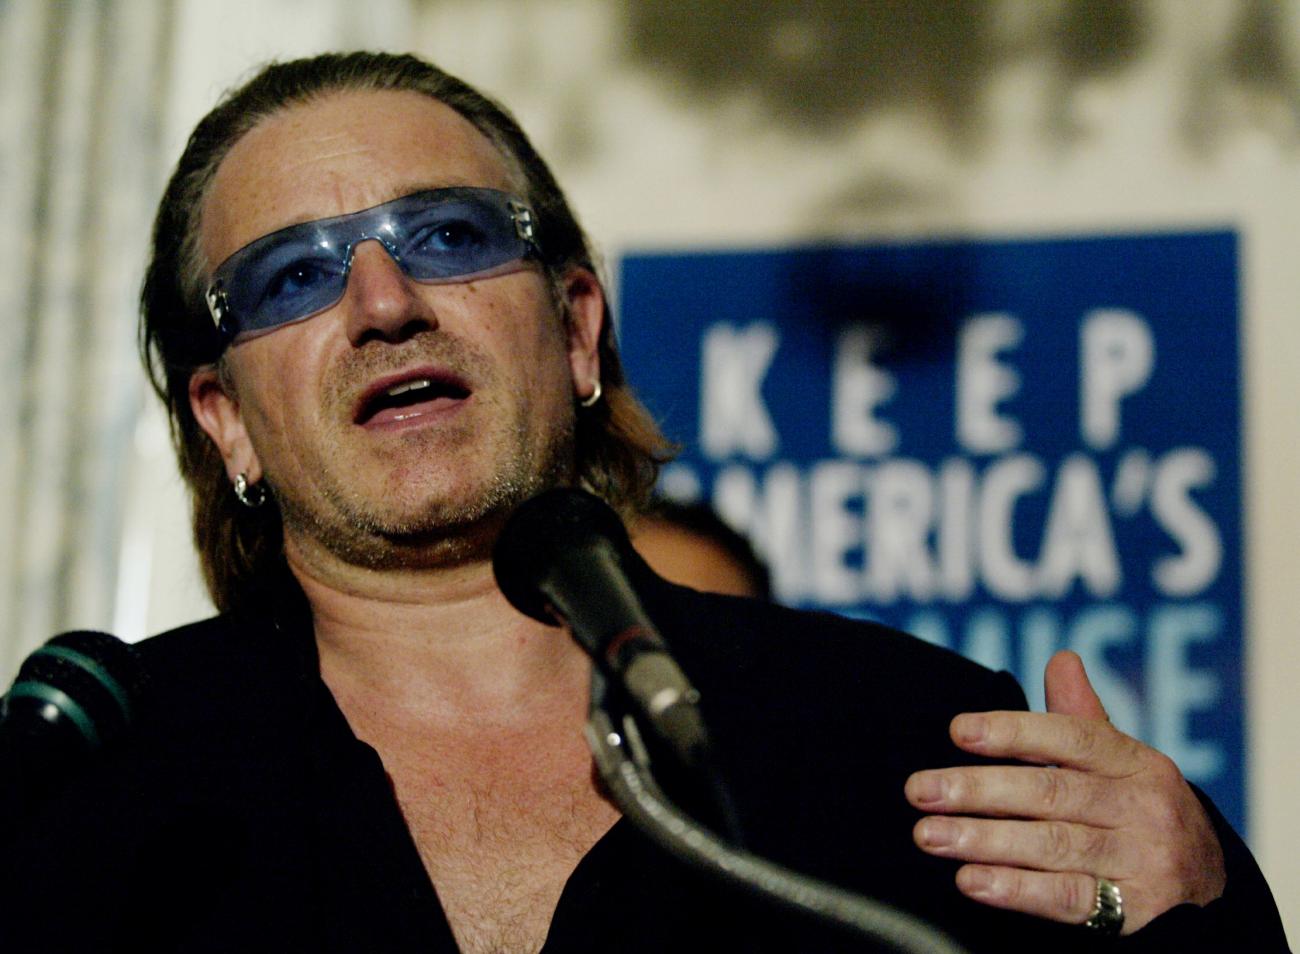 Musician Bono, from the band U2, joined representatives from several U.S. religious groups to urge President Bush and Congress to keep America's promise to Africa by fully funding AIDS and anti-poverty initiatives in the Foreign Operations Appropriations Bill